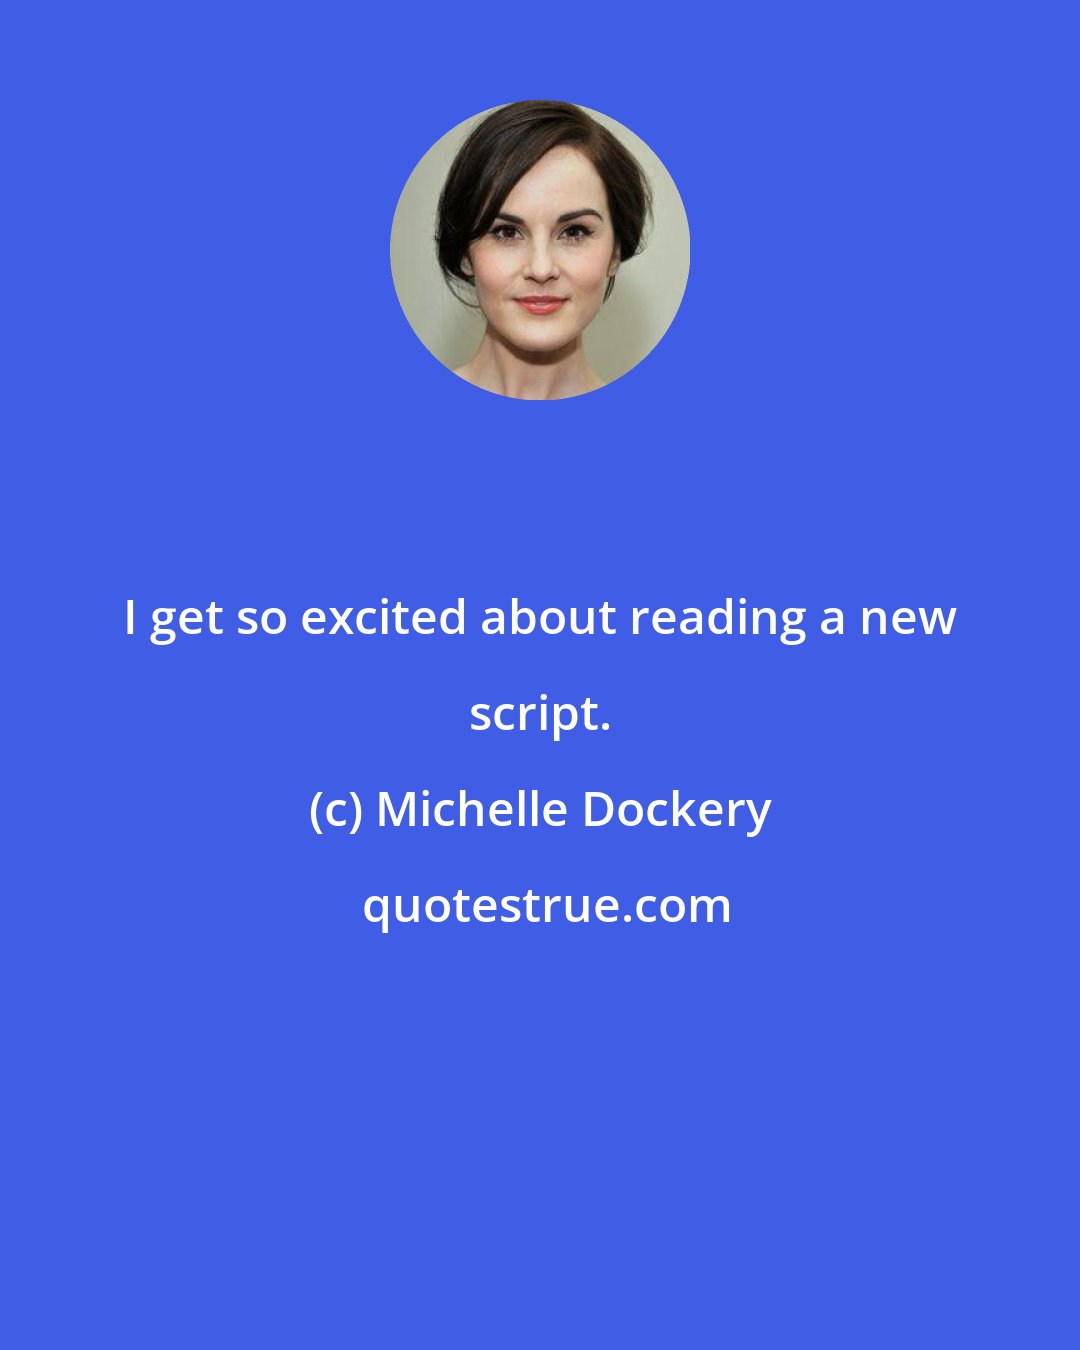 Michelle Dockery: I get so excited about reading a new script.